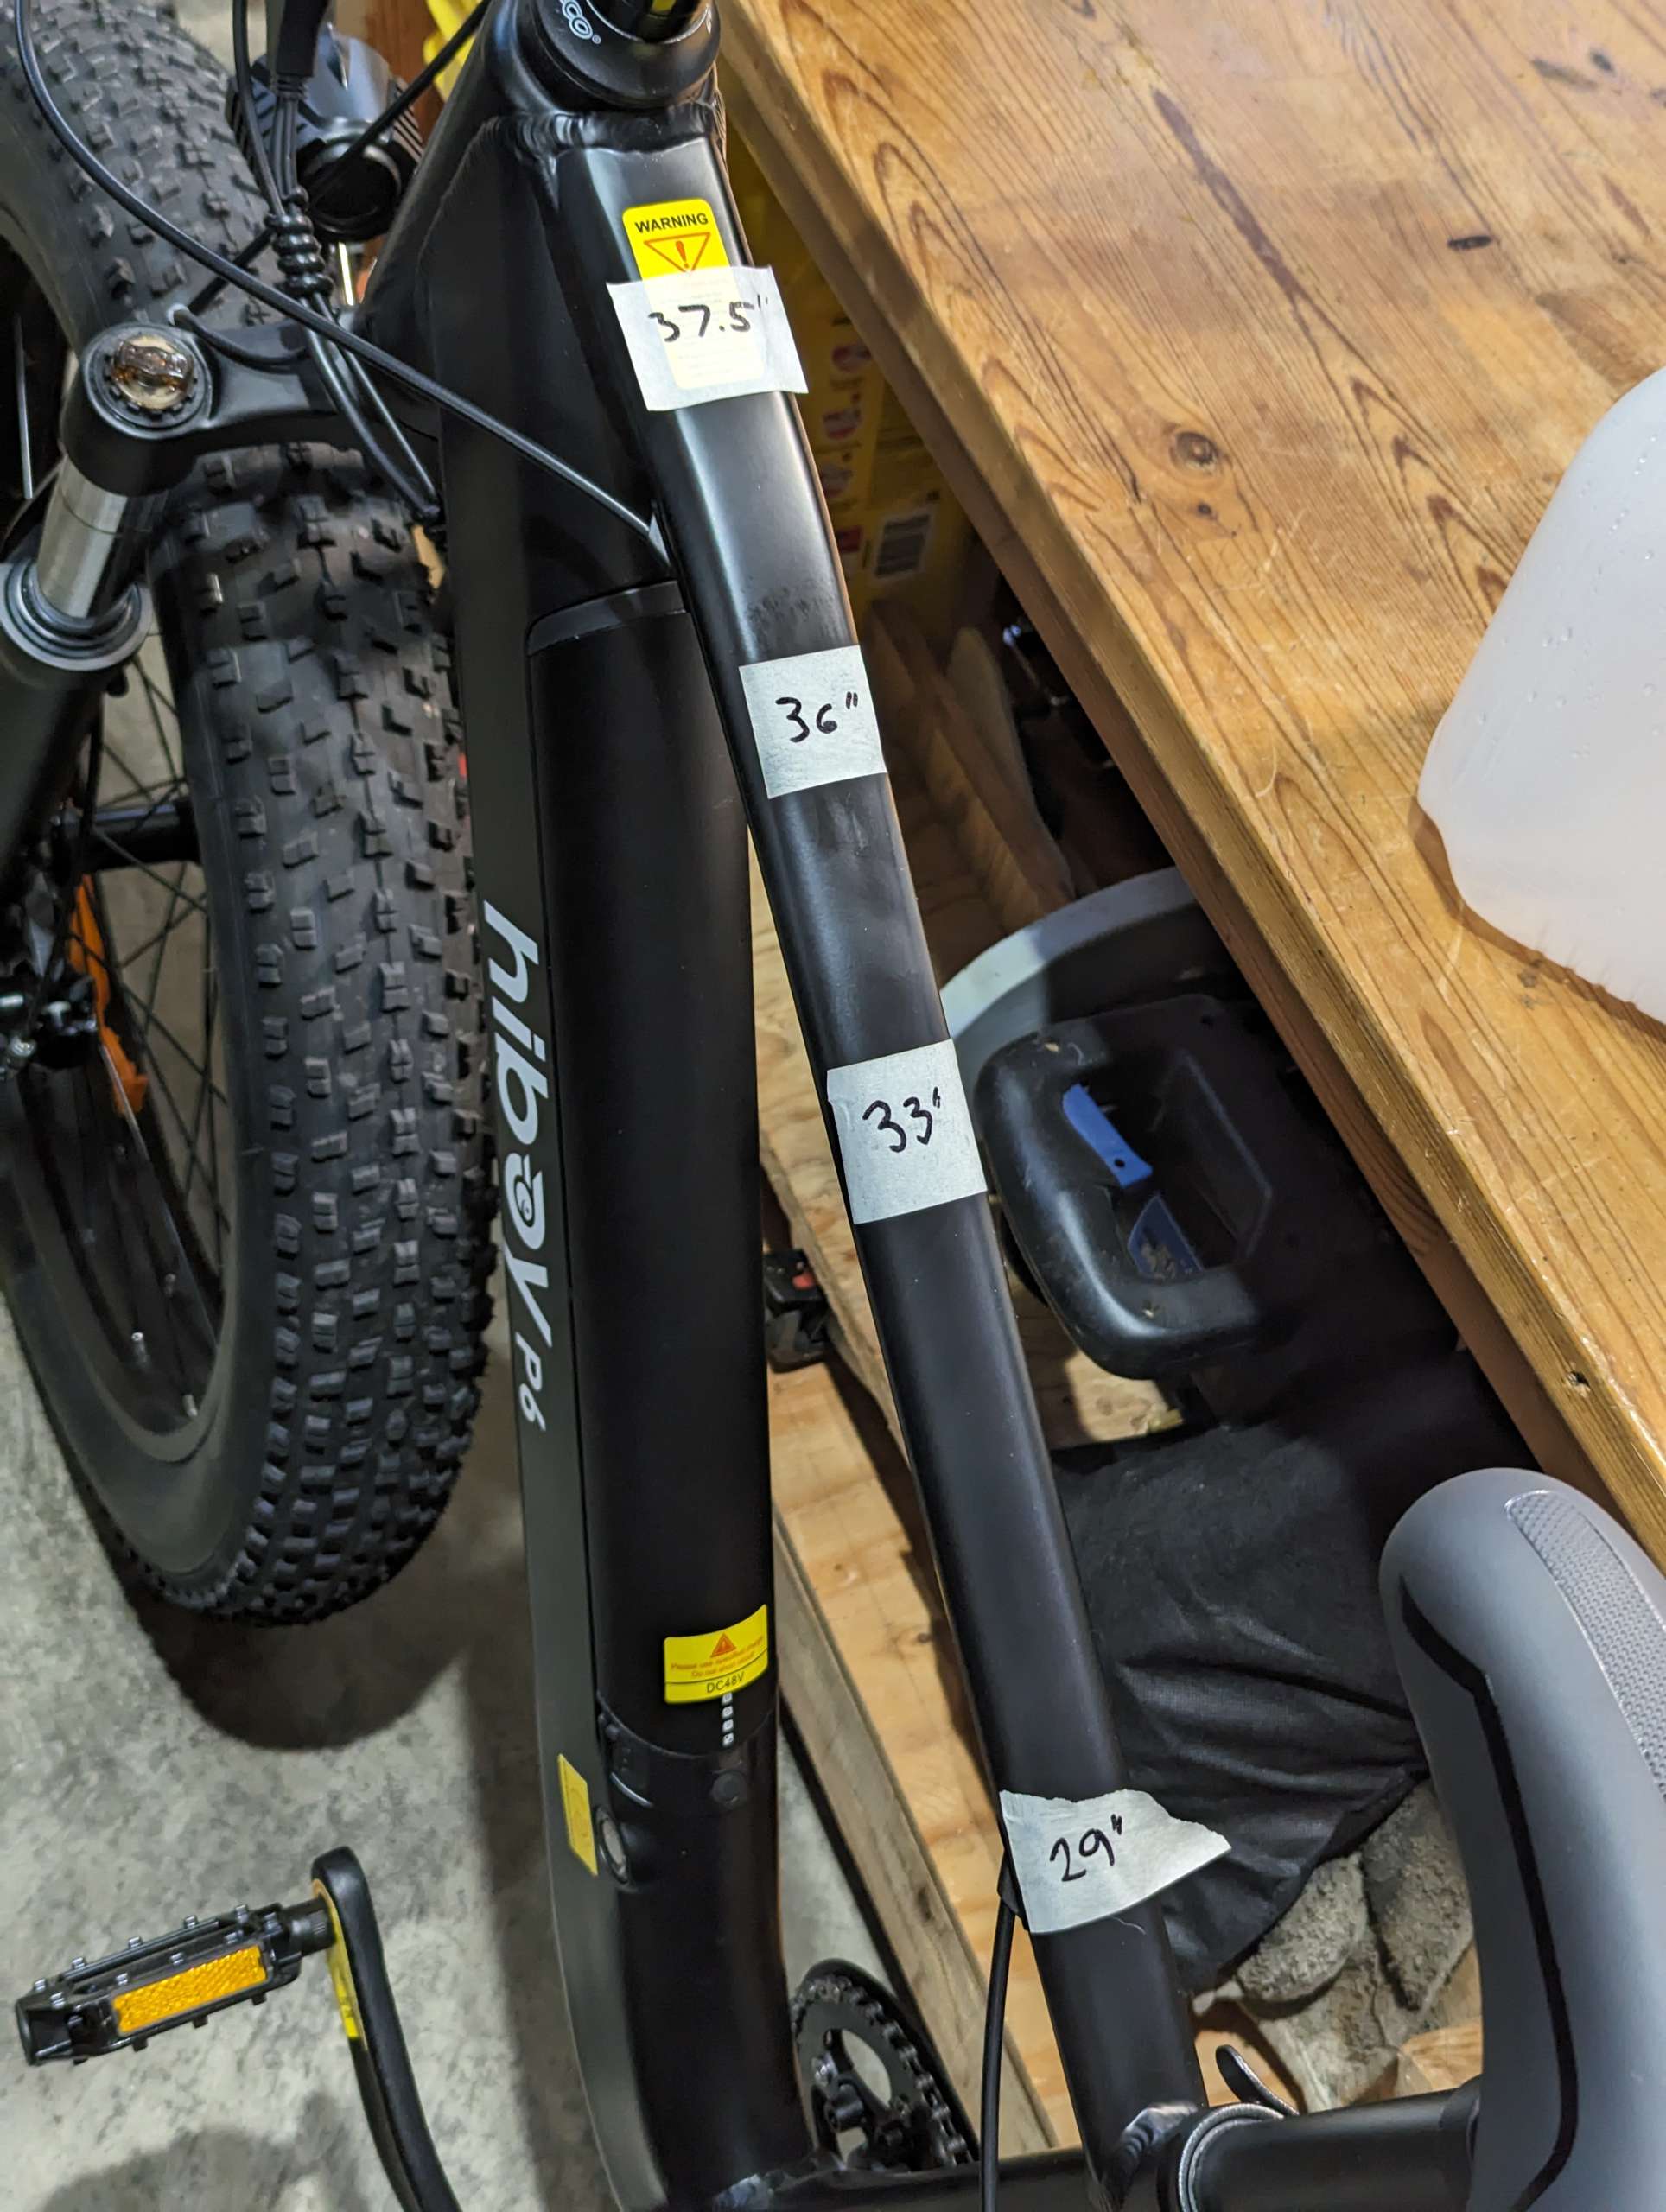 Hiboy P6 Fat Tire Electric Bike review - almost the perfect commuter bike -  The Gadgeteer